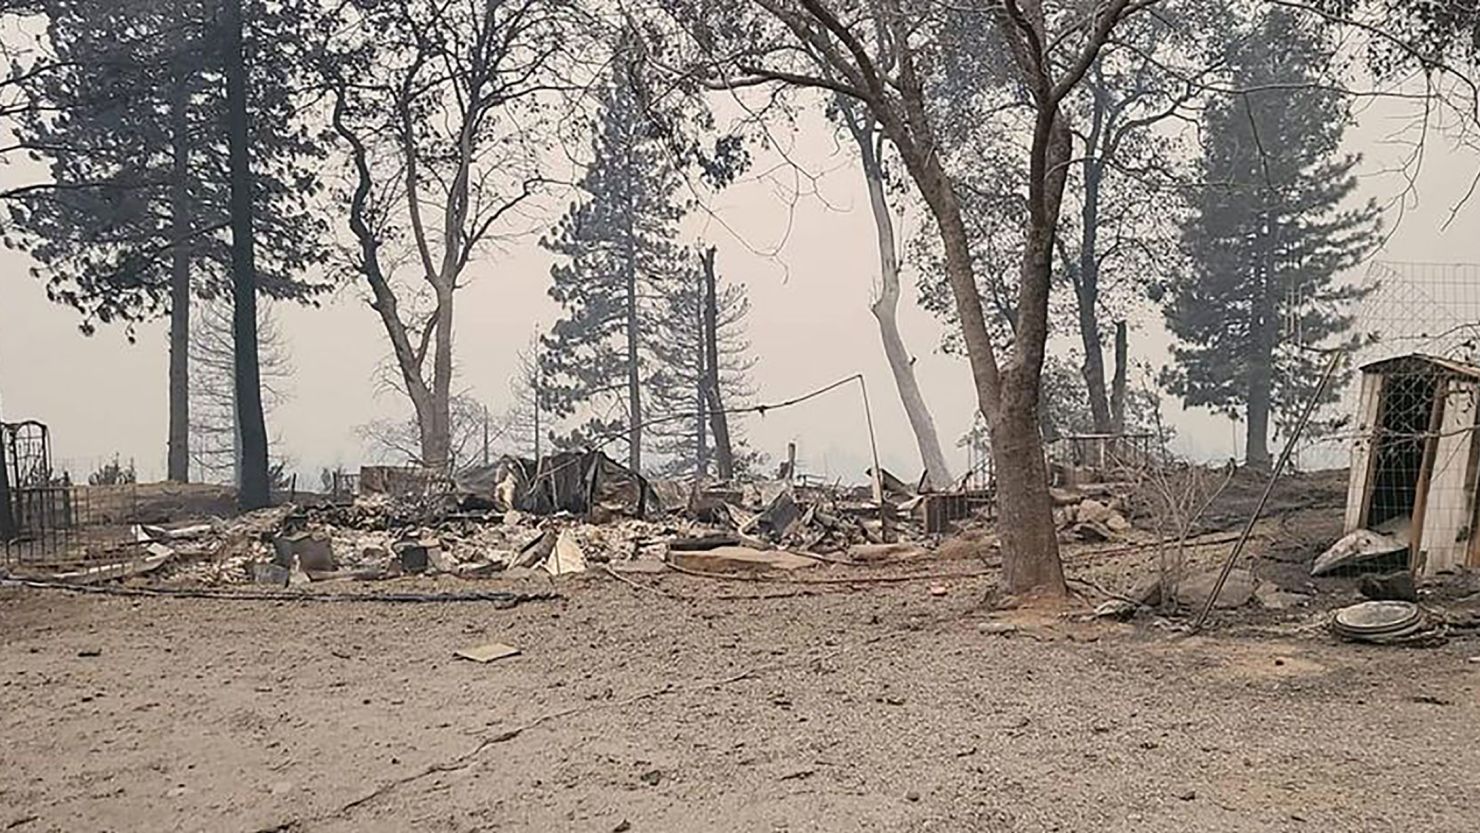 Brad and Kelly Thomas lost almost everything when the fire ripped through Berry Creek, California, and destroyed their home, heavy equipment and other property.